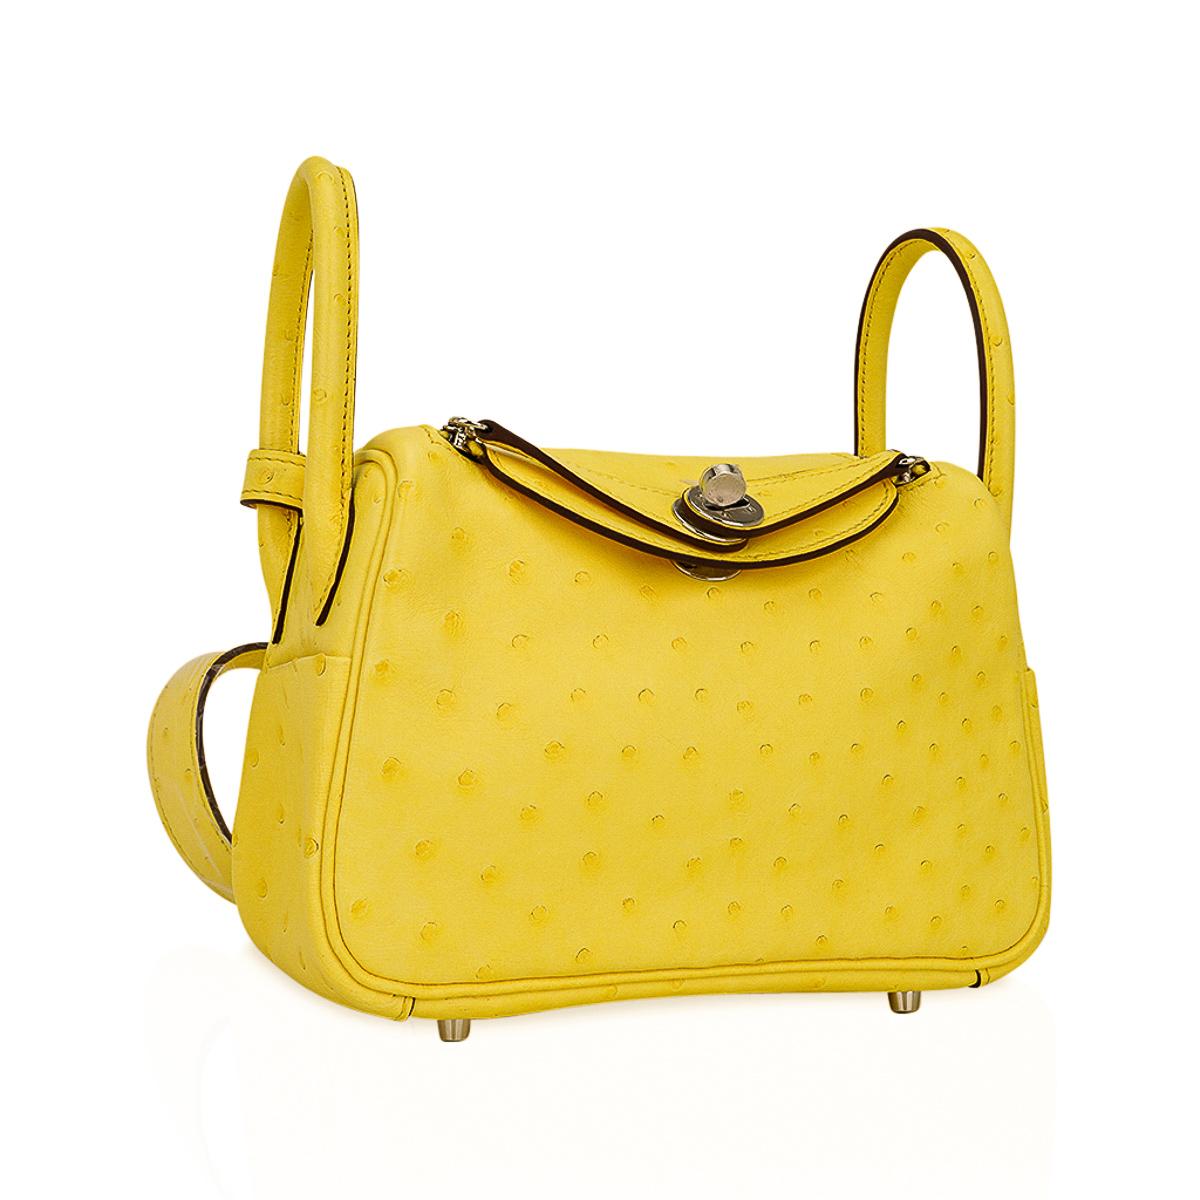 Mightychic offers an Hermes Lindy Mini 20 bag featured in clear sunny yellow Jaune Citron Ostrich Boreal.
Ostrich Boreal has a special satin finish.
This charming mini version of the Hermes Lindy bag debuted at the Hermes fall/winter 2019 runway